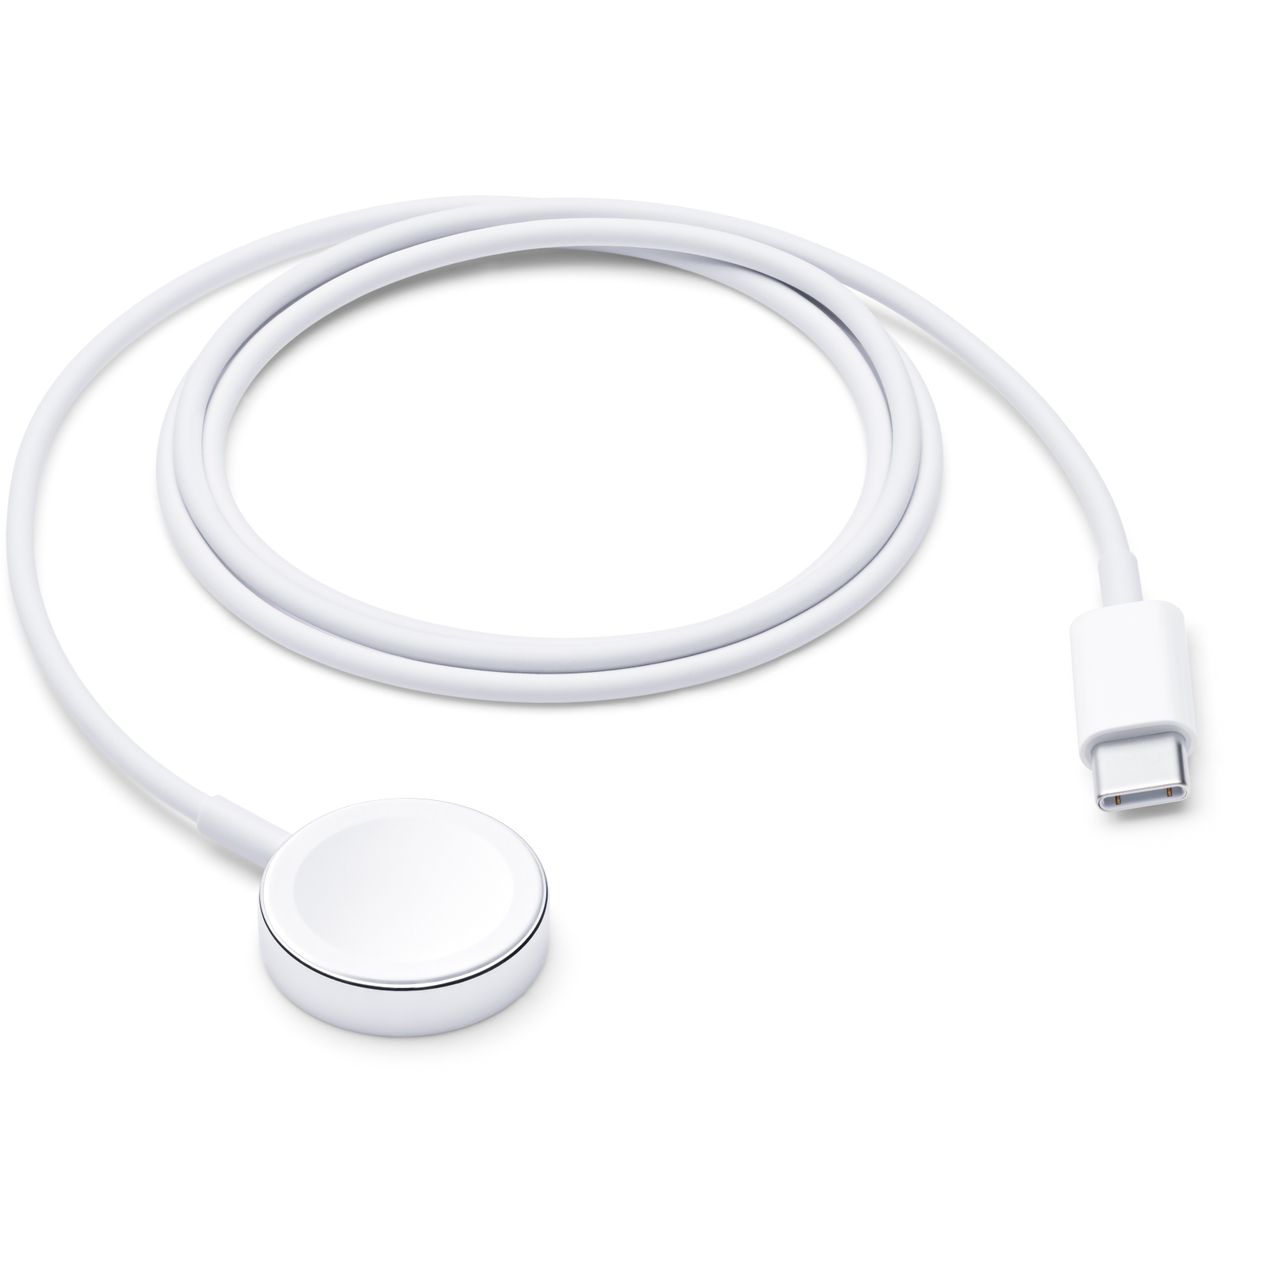 Apple Magnetic Charger to USB-C Cable (1m) Review